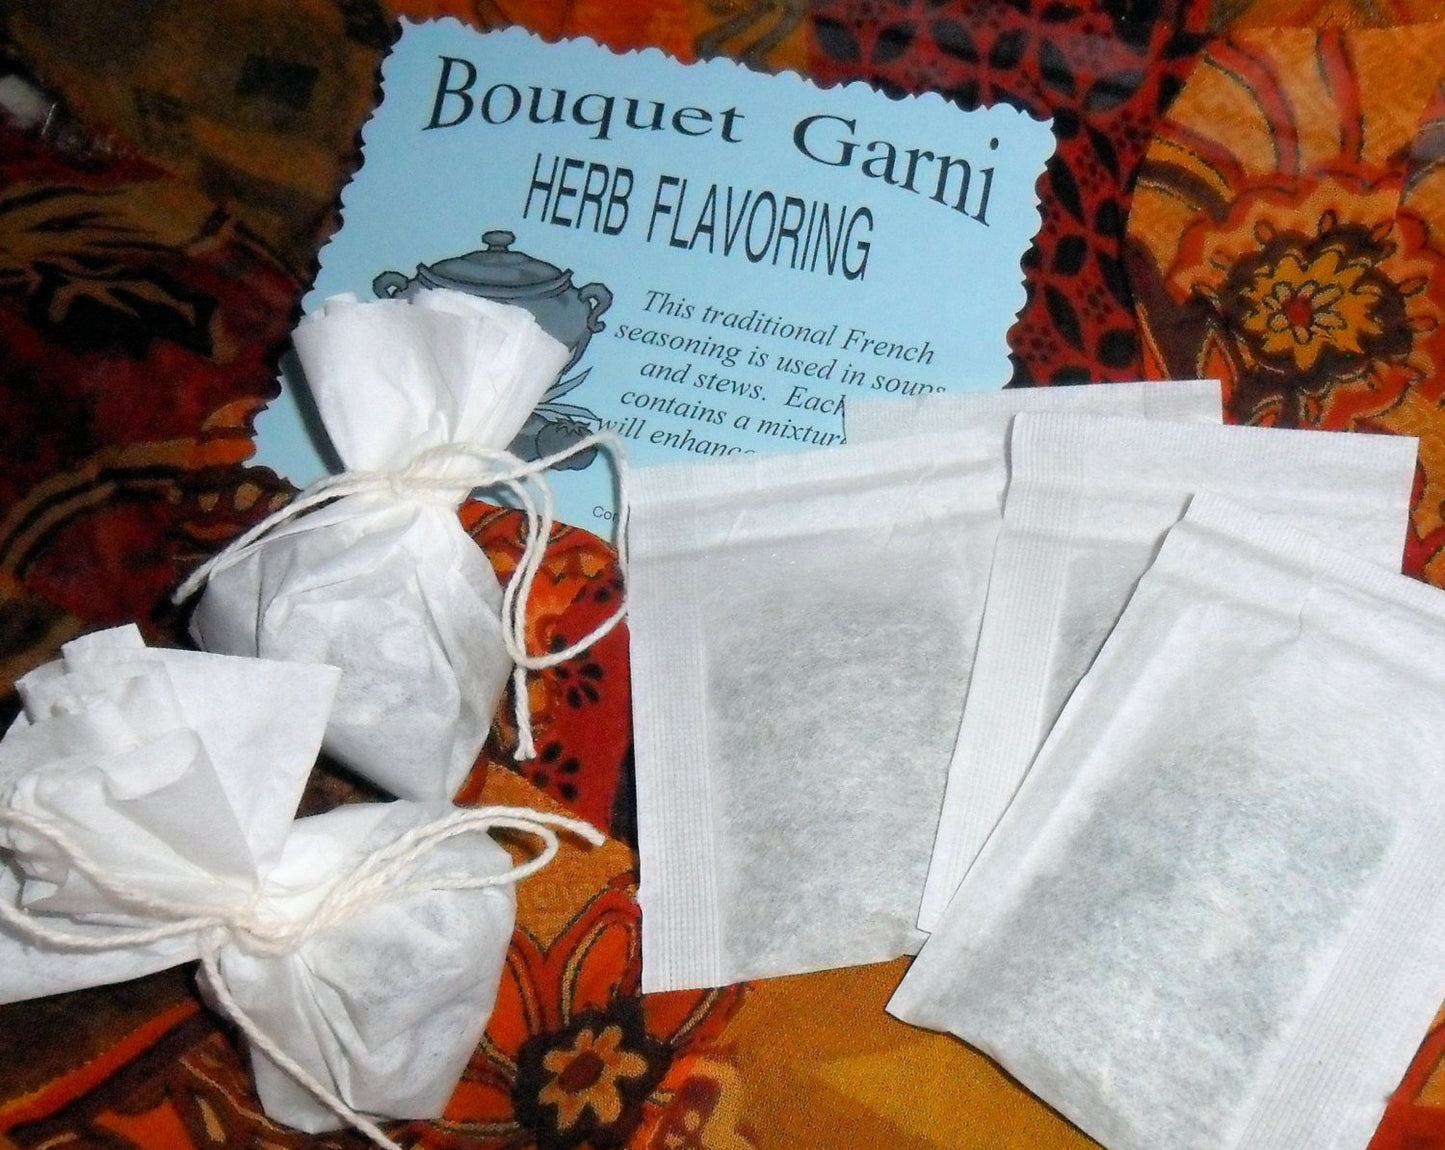 Bouquet Garni Seasoning Packets, herb seasoning for soups, stews and casseroles, bay leaf, rosemary, peppercorns